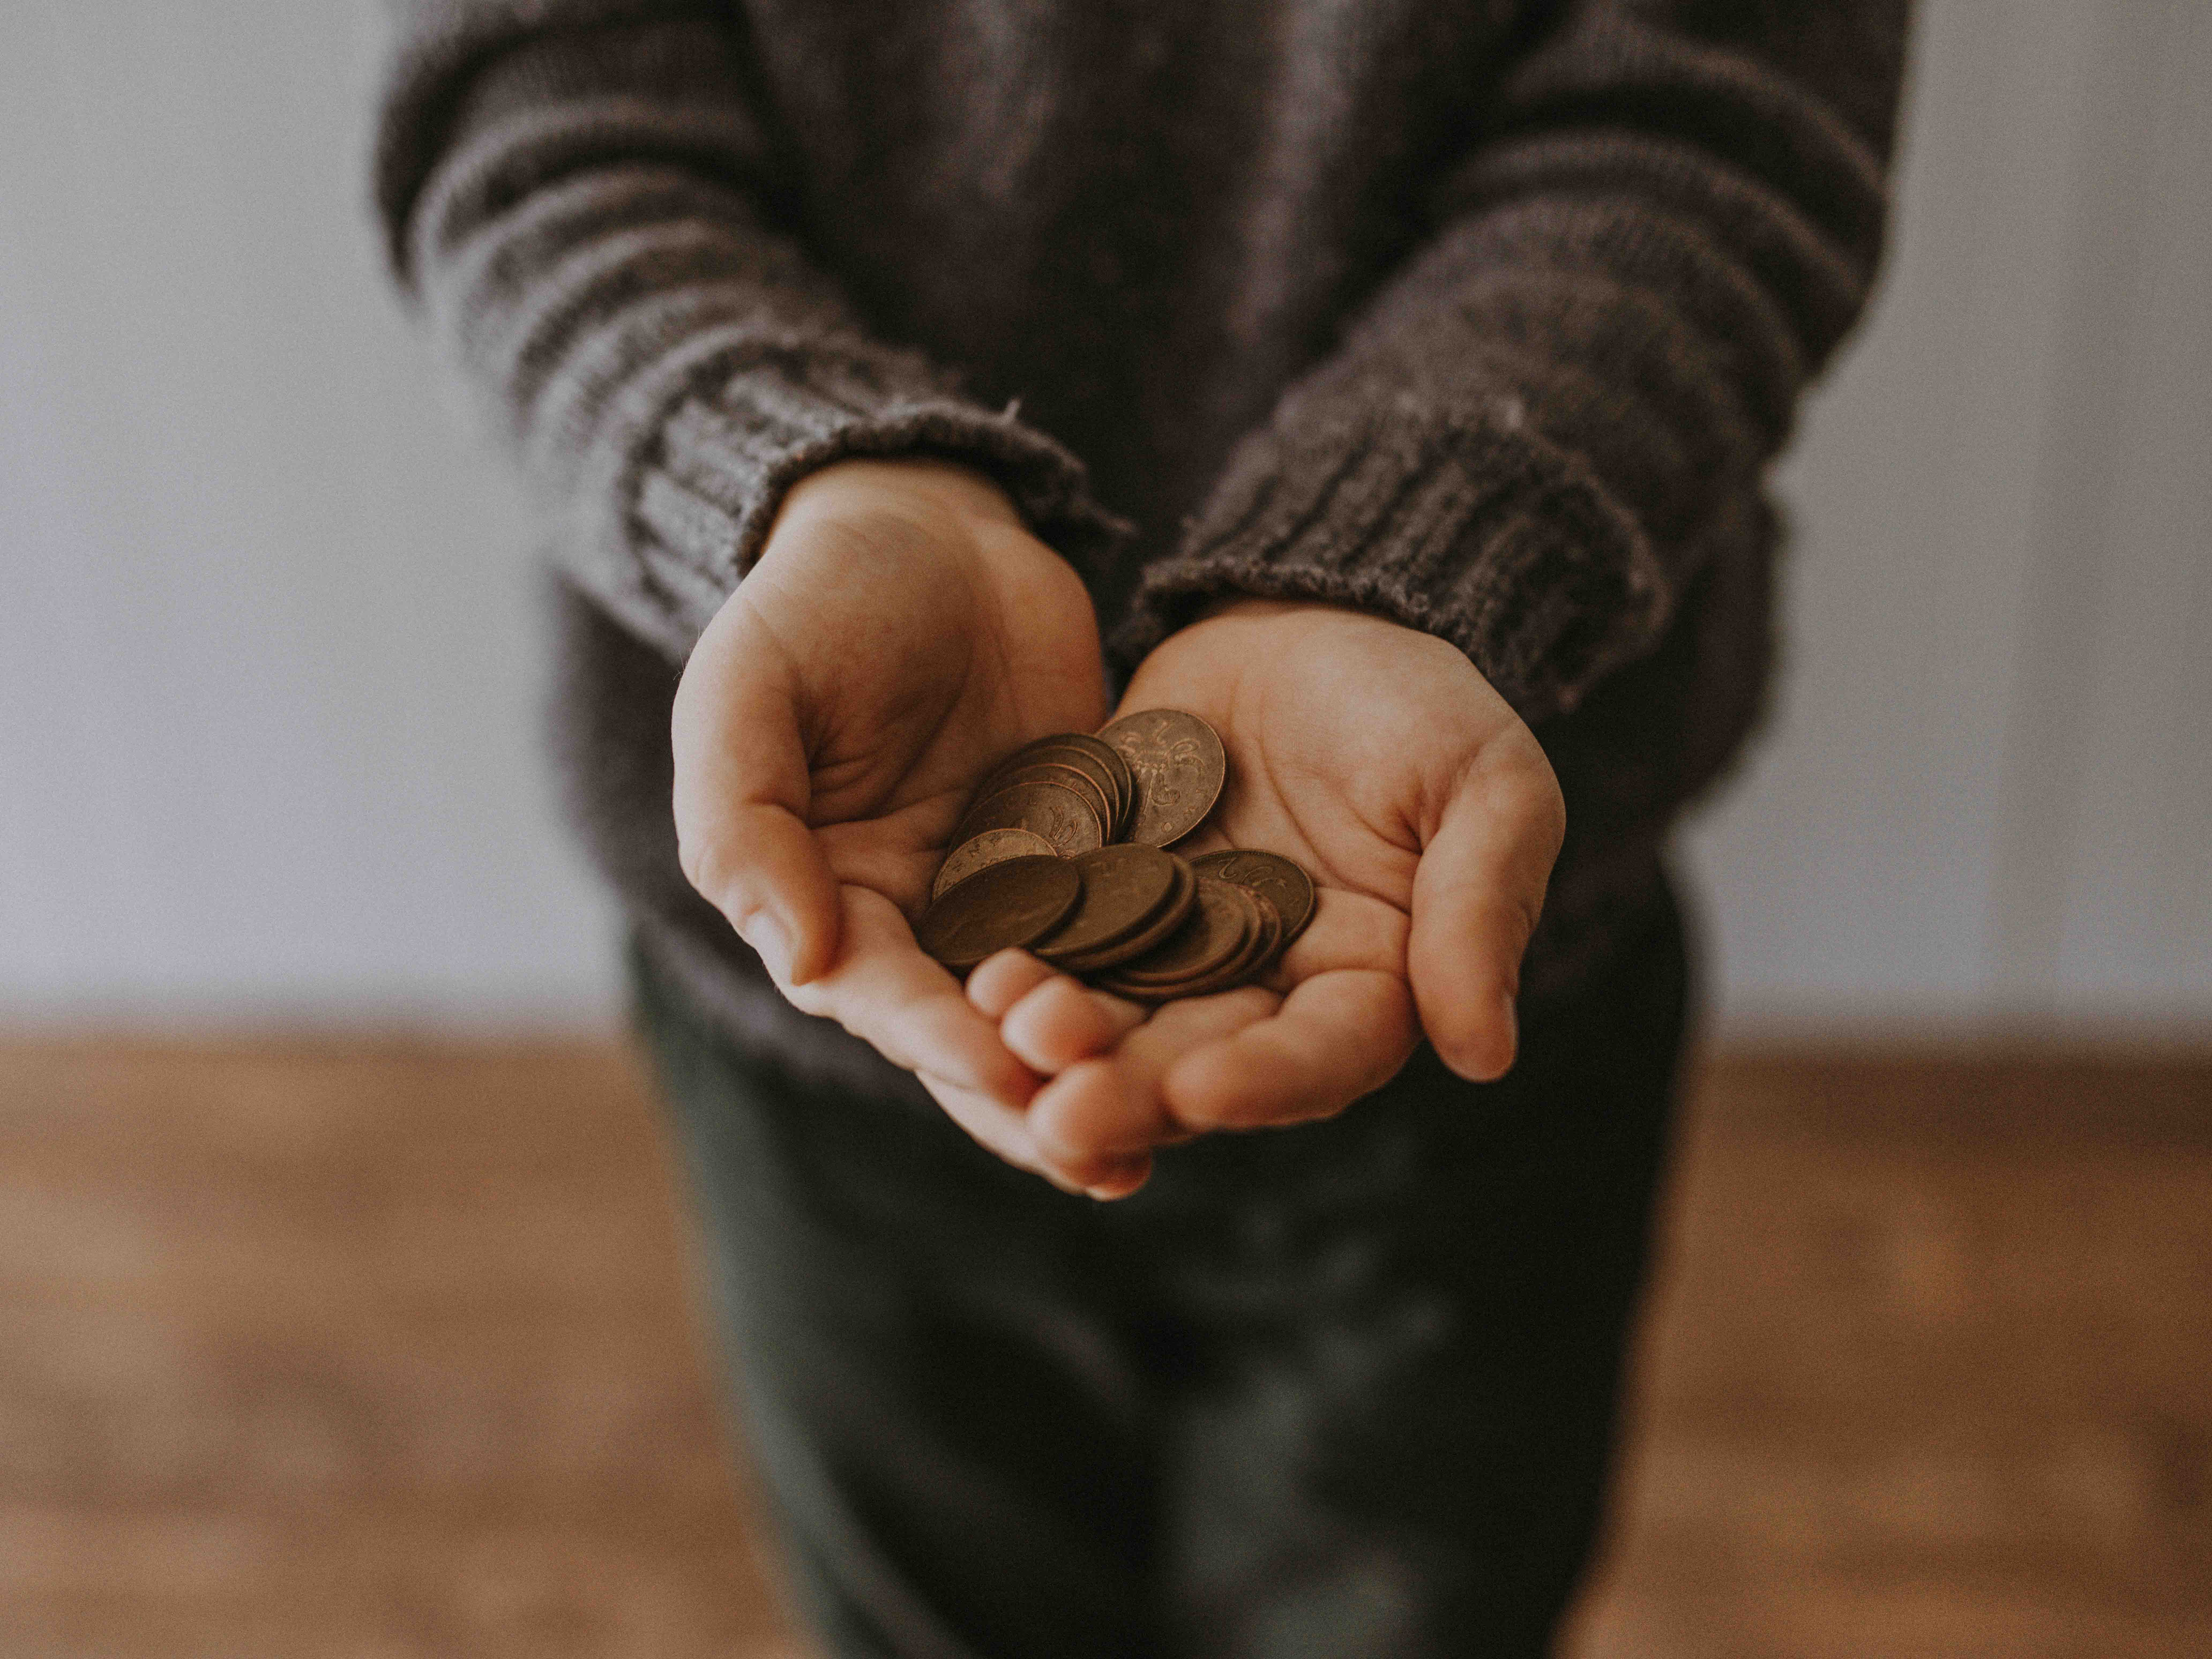 Managing Money as a Christian (8 Important Questions)